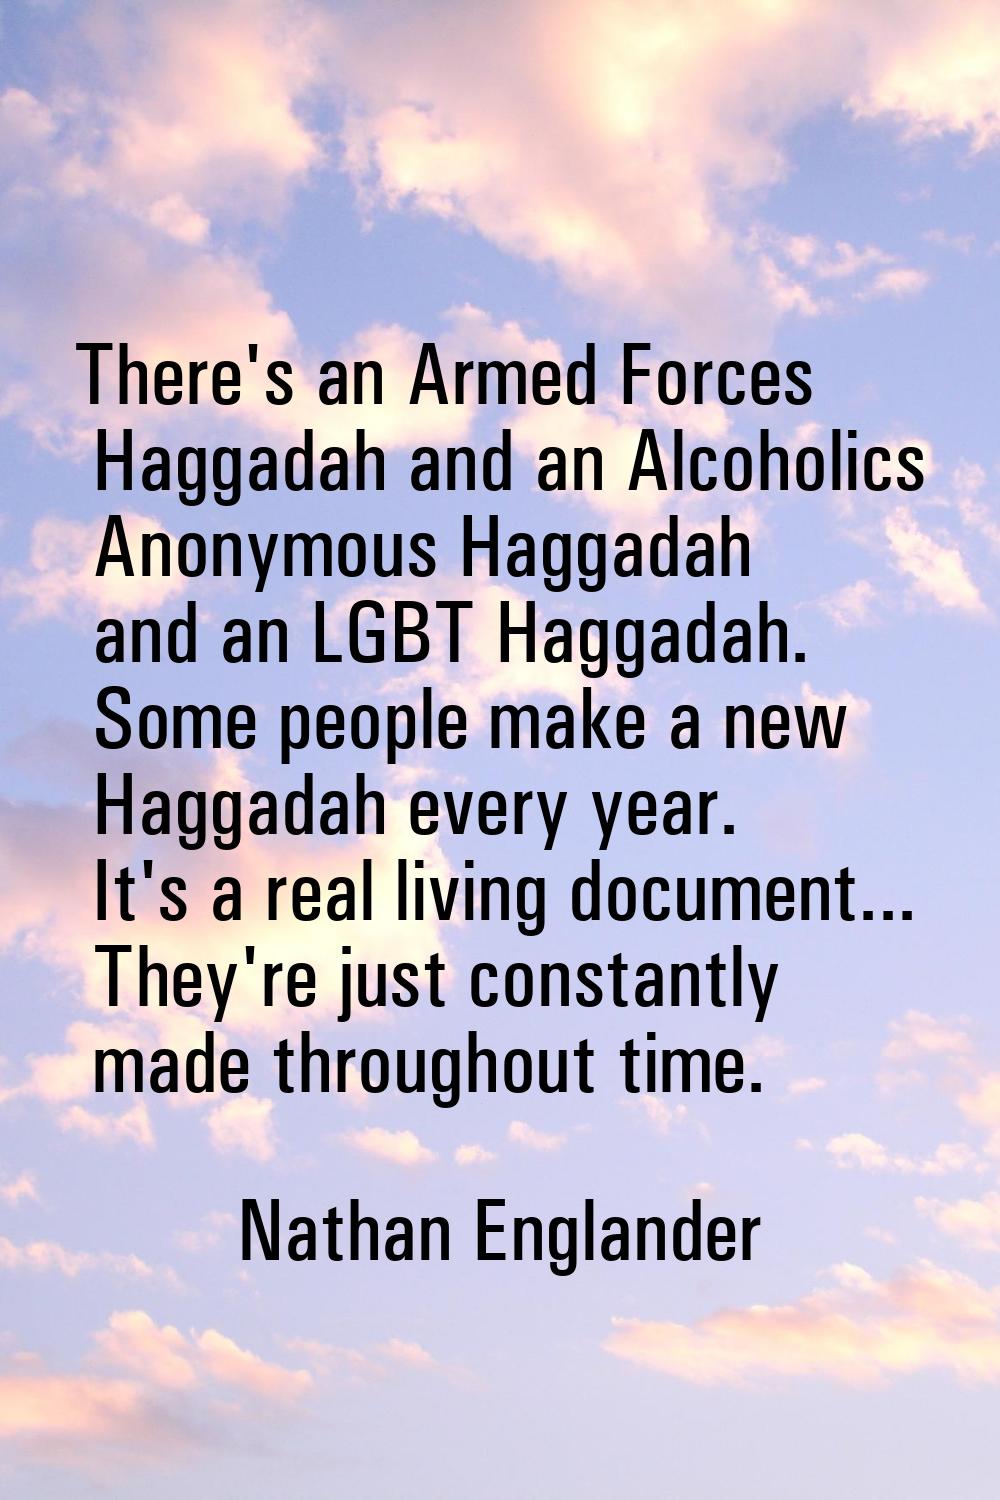 There's an Armed Forces Haggadah and an Alcoholics Anonymous Haggadah and an LGBT Haggadah. Some pe